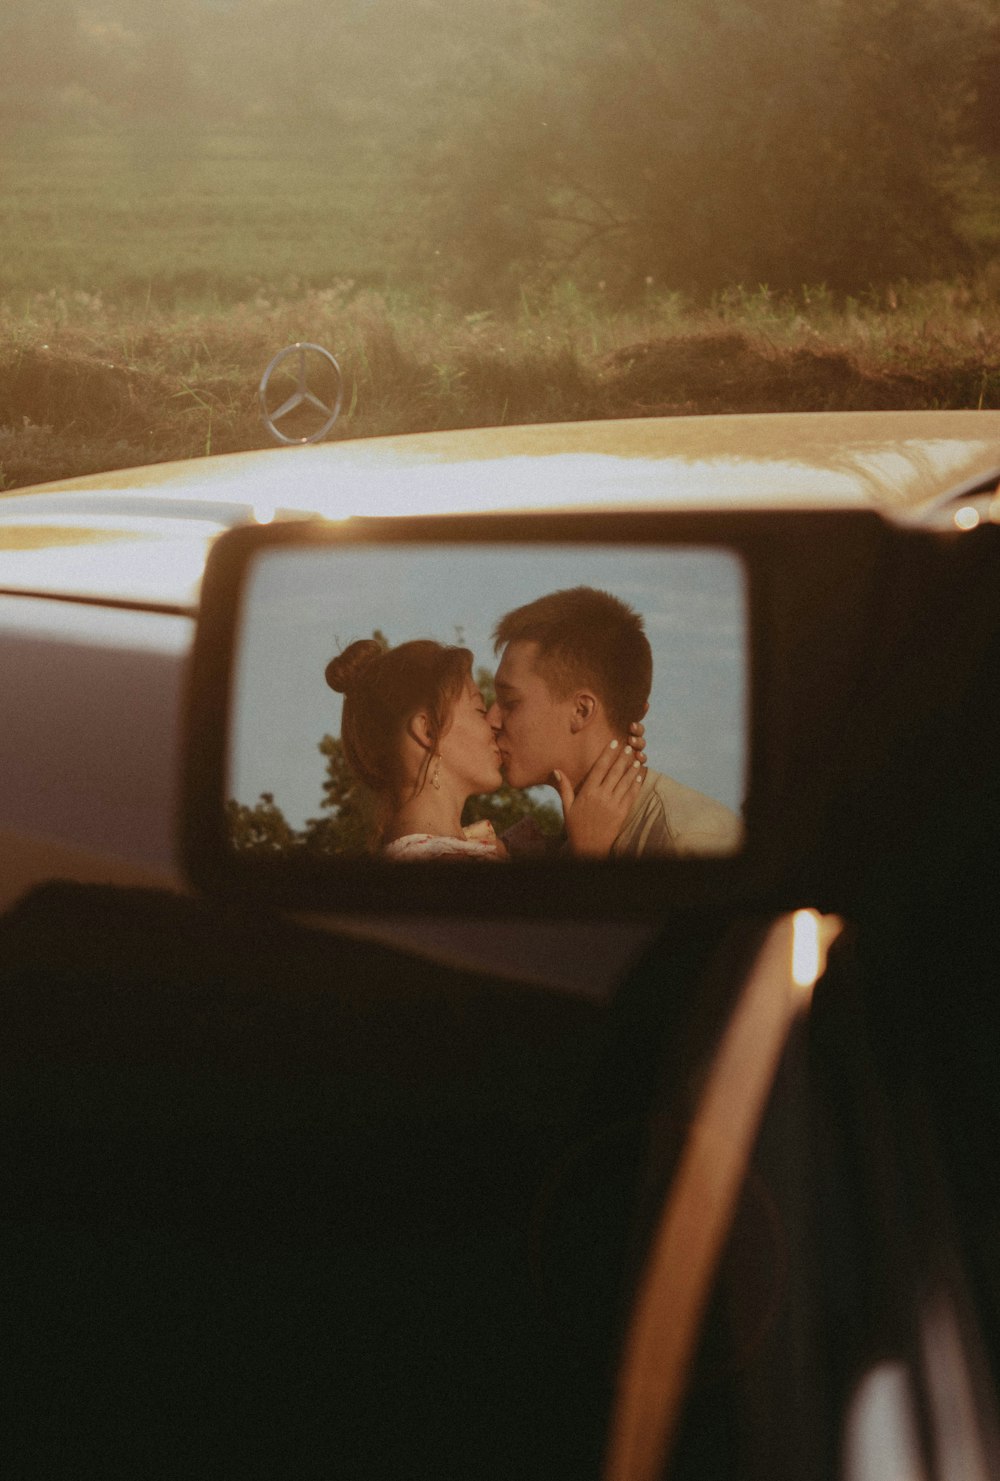 a man and a woman are kissing in a rear view mirror